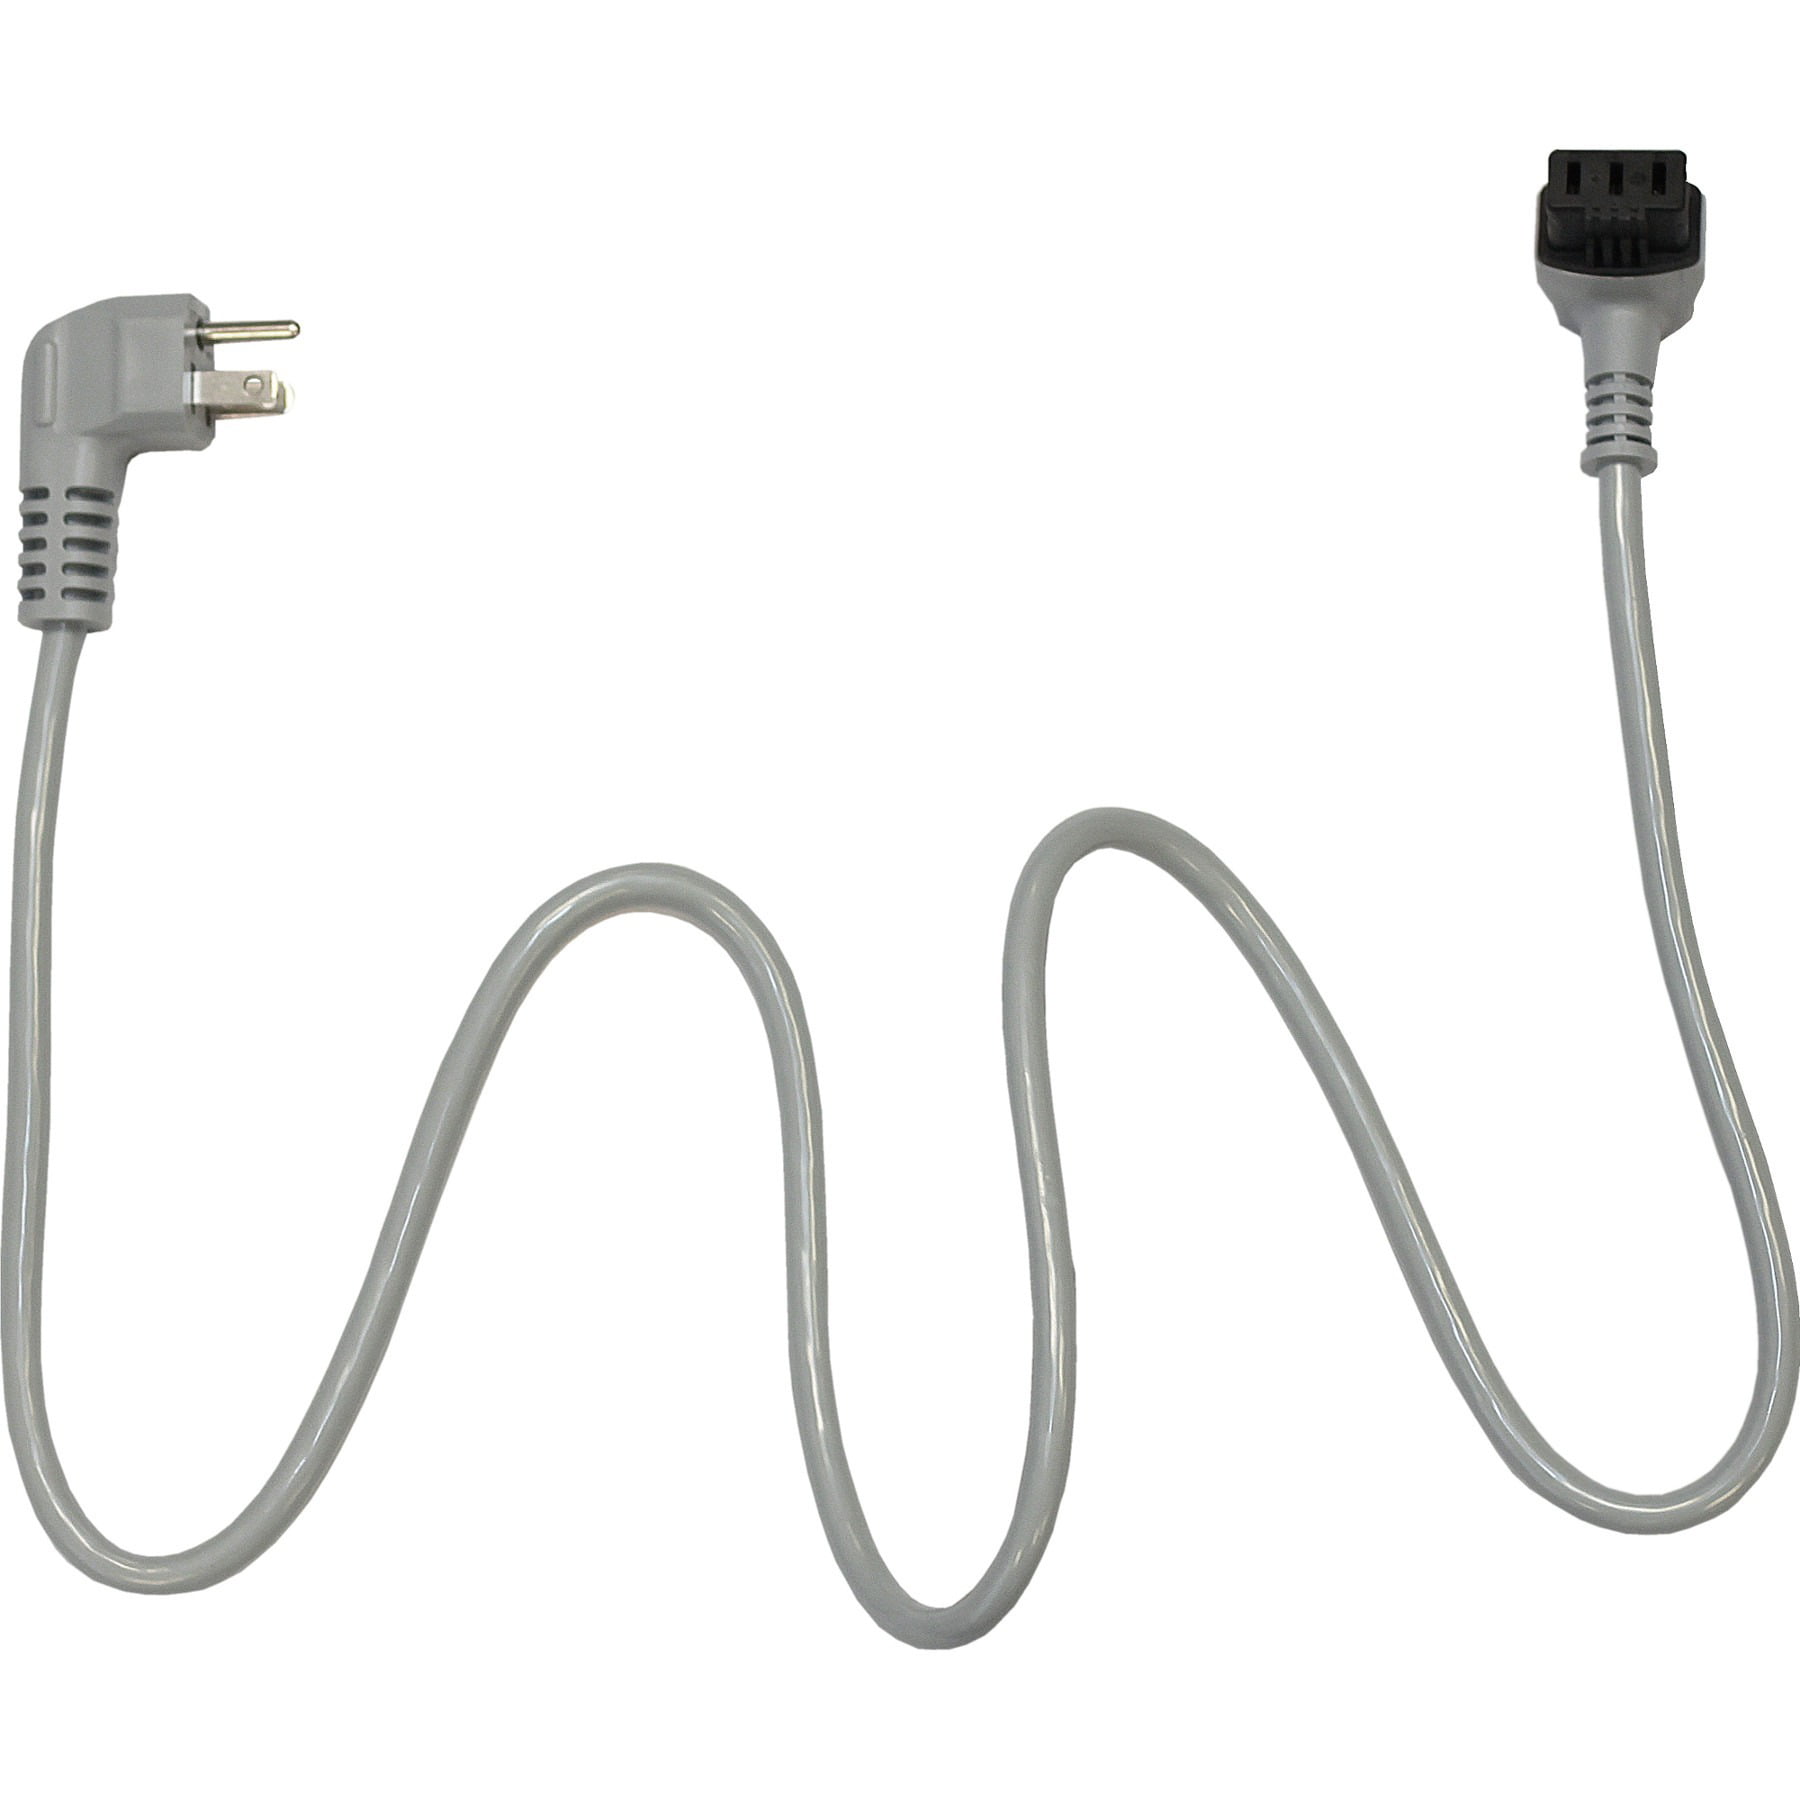 5 Foot Bosch SGZPC001UC Dishwasher Power Cord with Connectors 